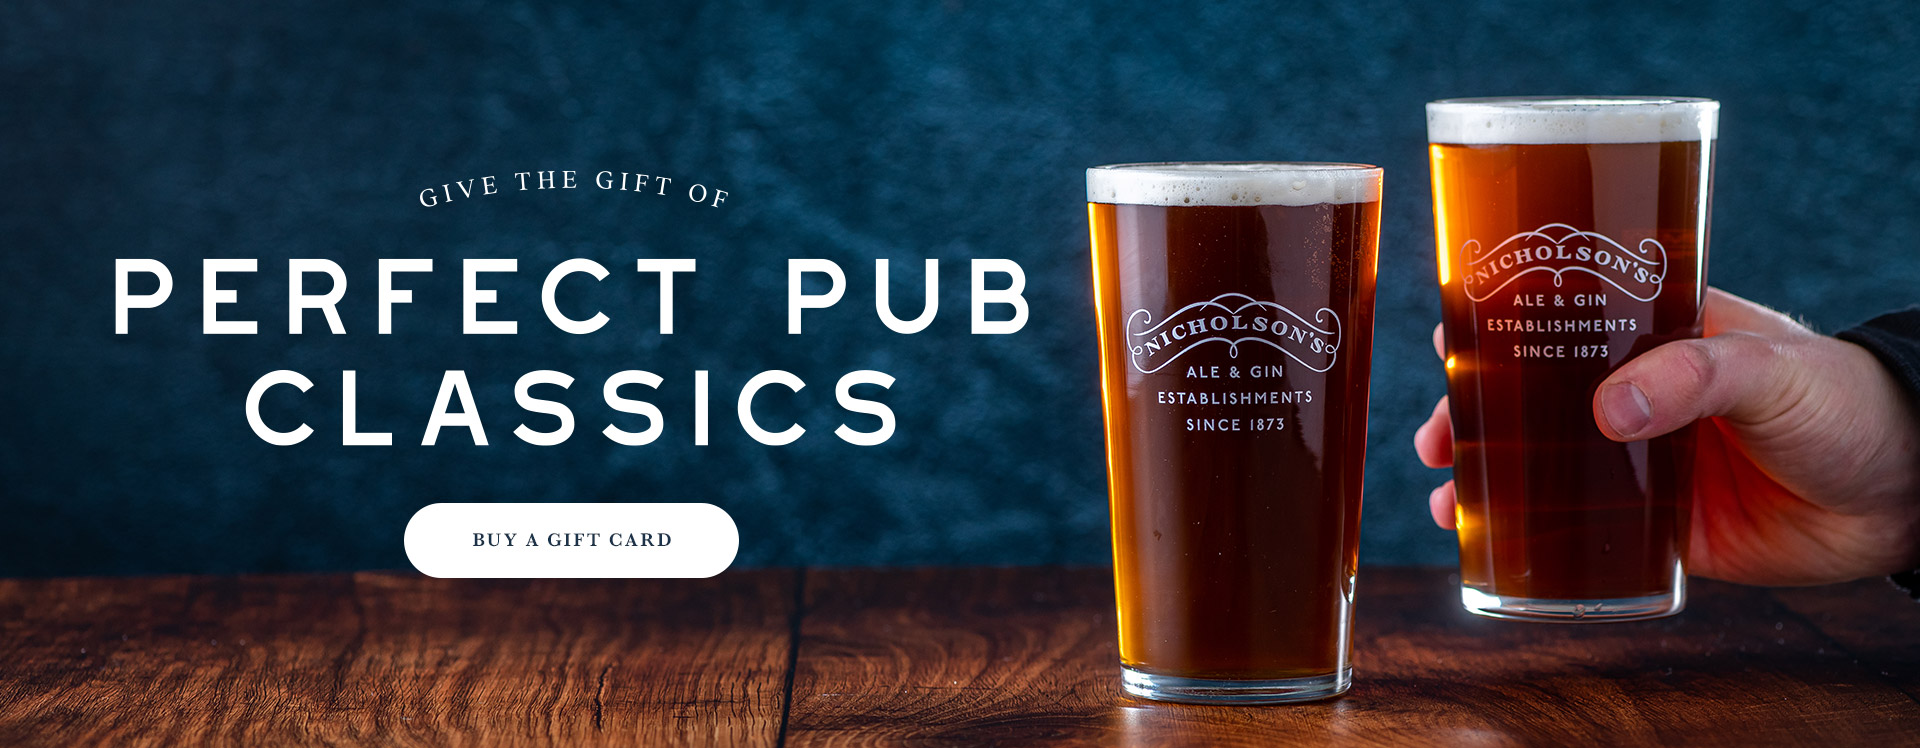 Nicholson’s Pub Gift Voucher at The Elephant and Castle in London